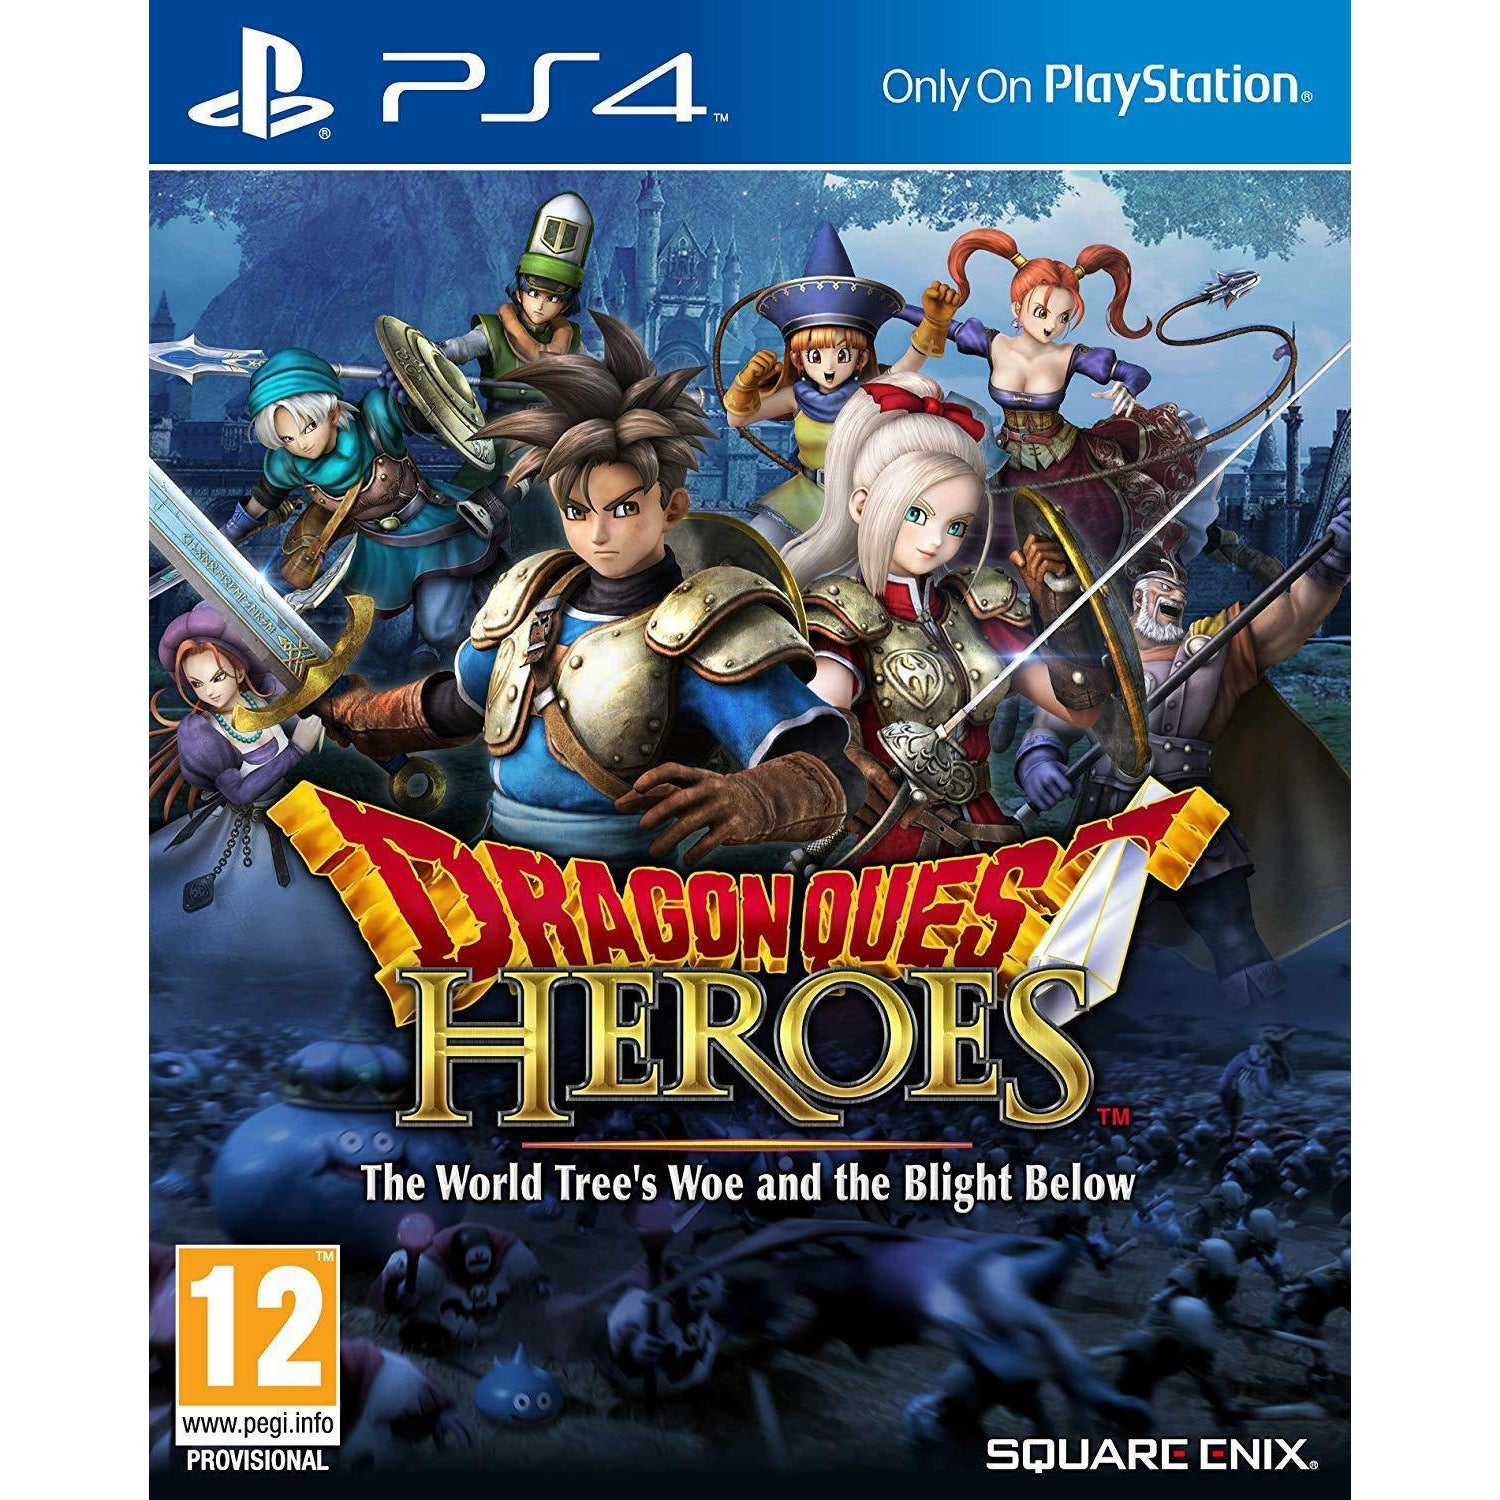 Dragon Quest Heroes: The World Tree’s Woe and the Blight Below para PS4 - Gshop Pty